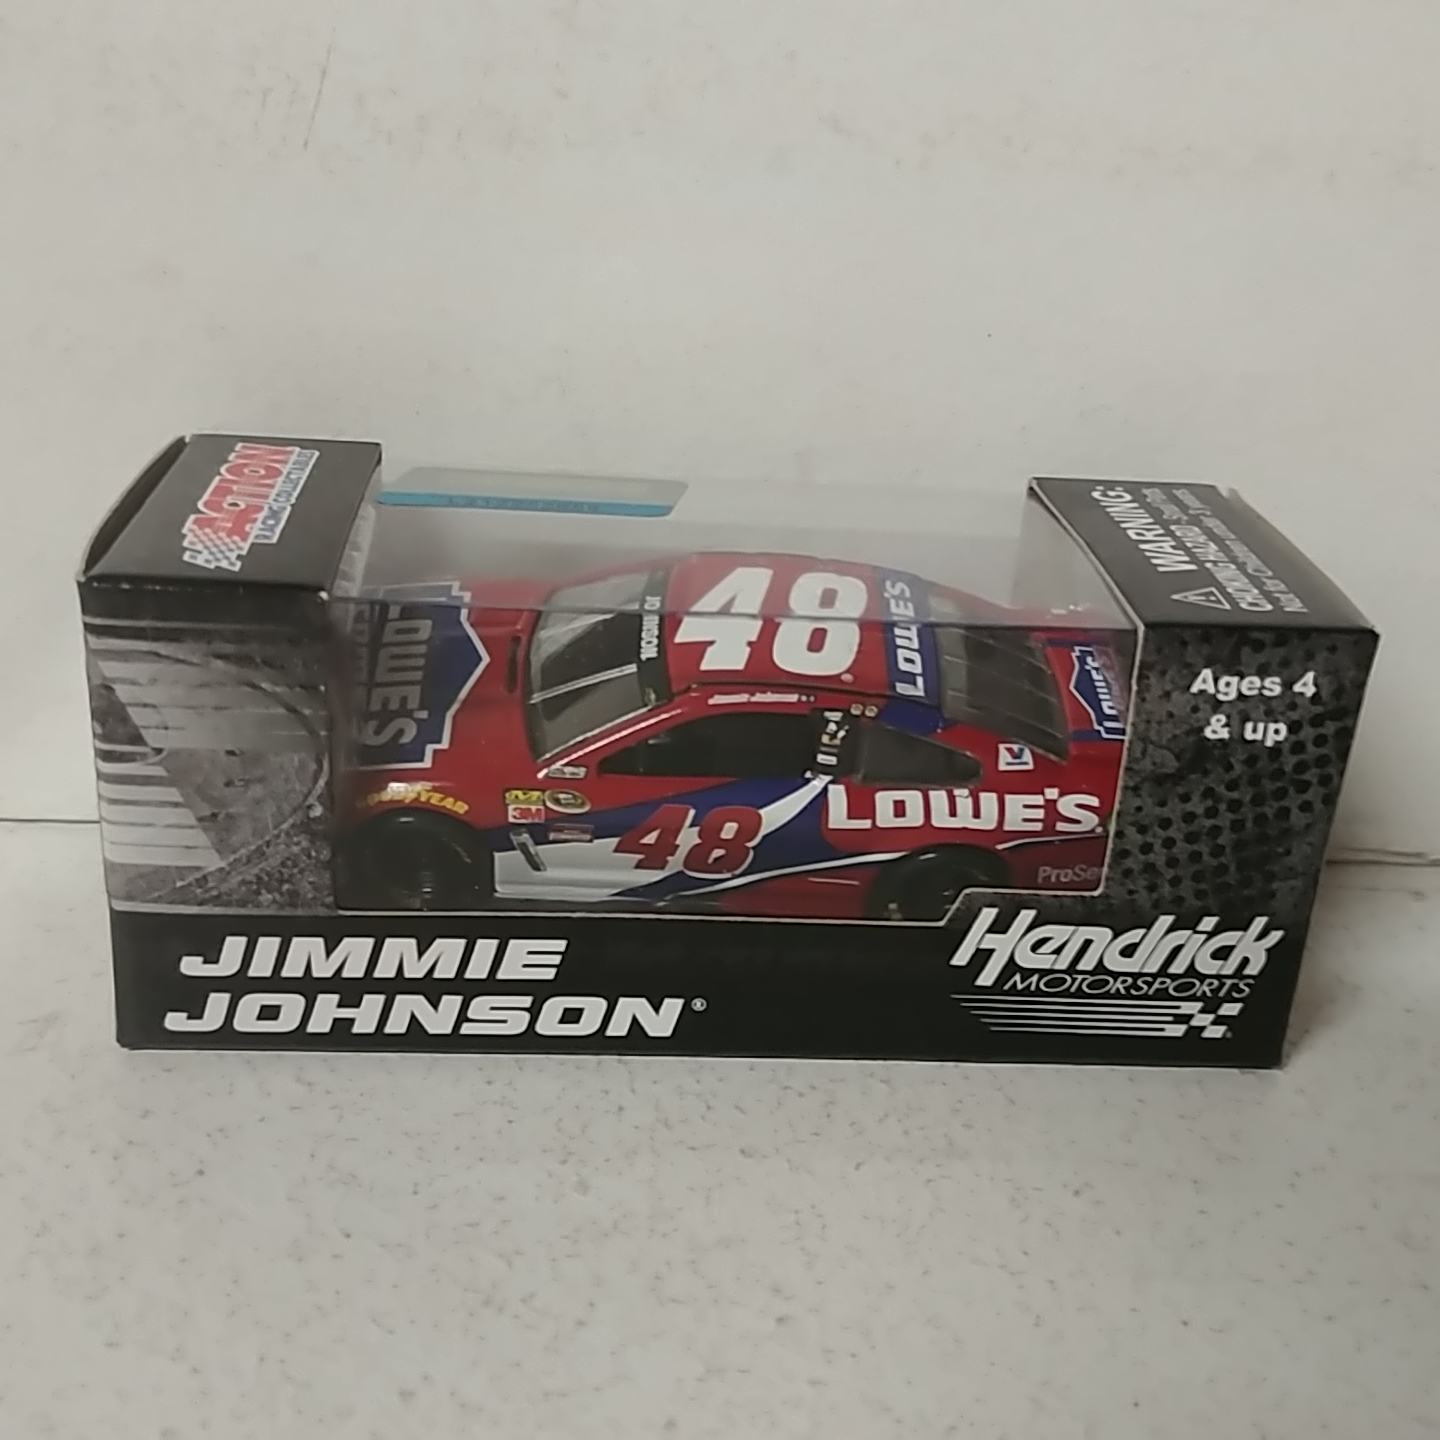 2016 Jimmie Johnson 1/64th Lowe's "Red Vest" Pitstop Series Chevrolet SS